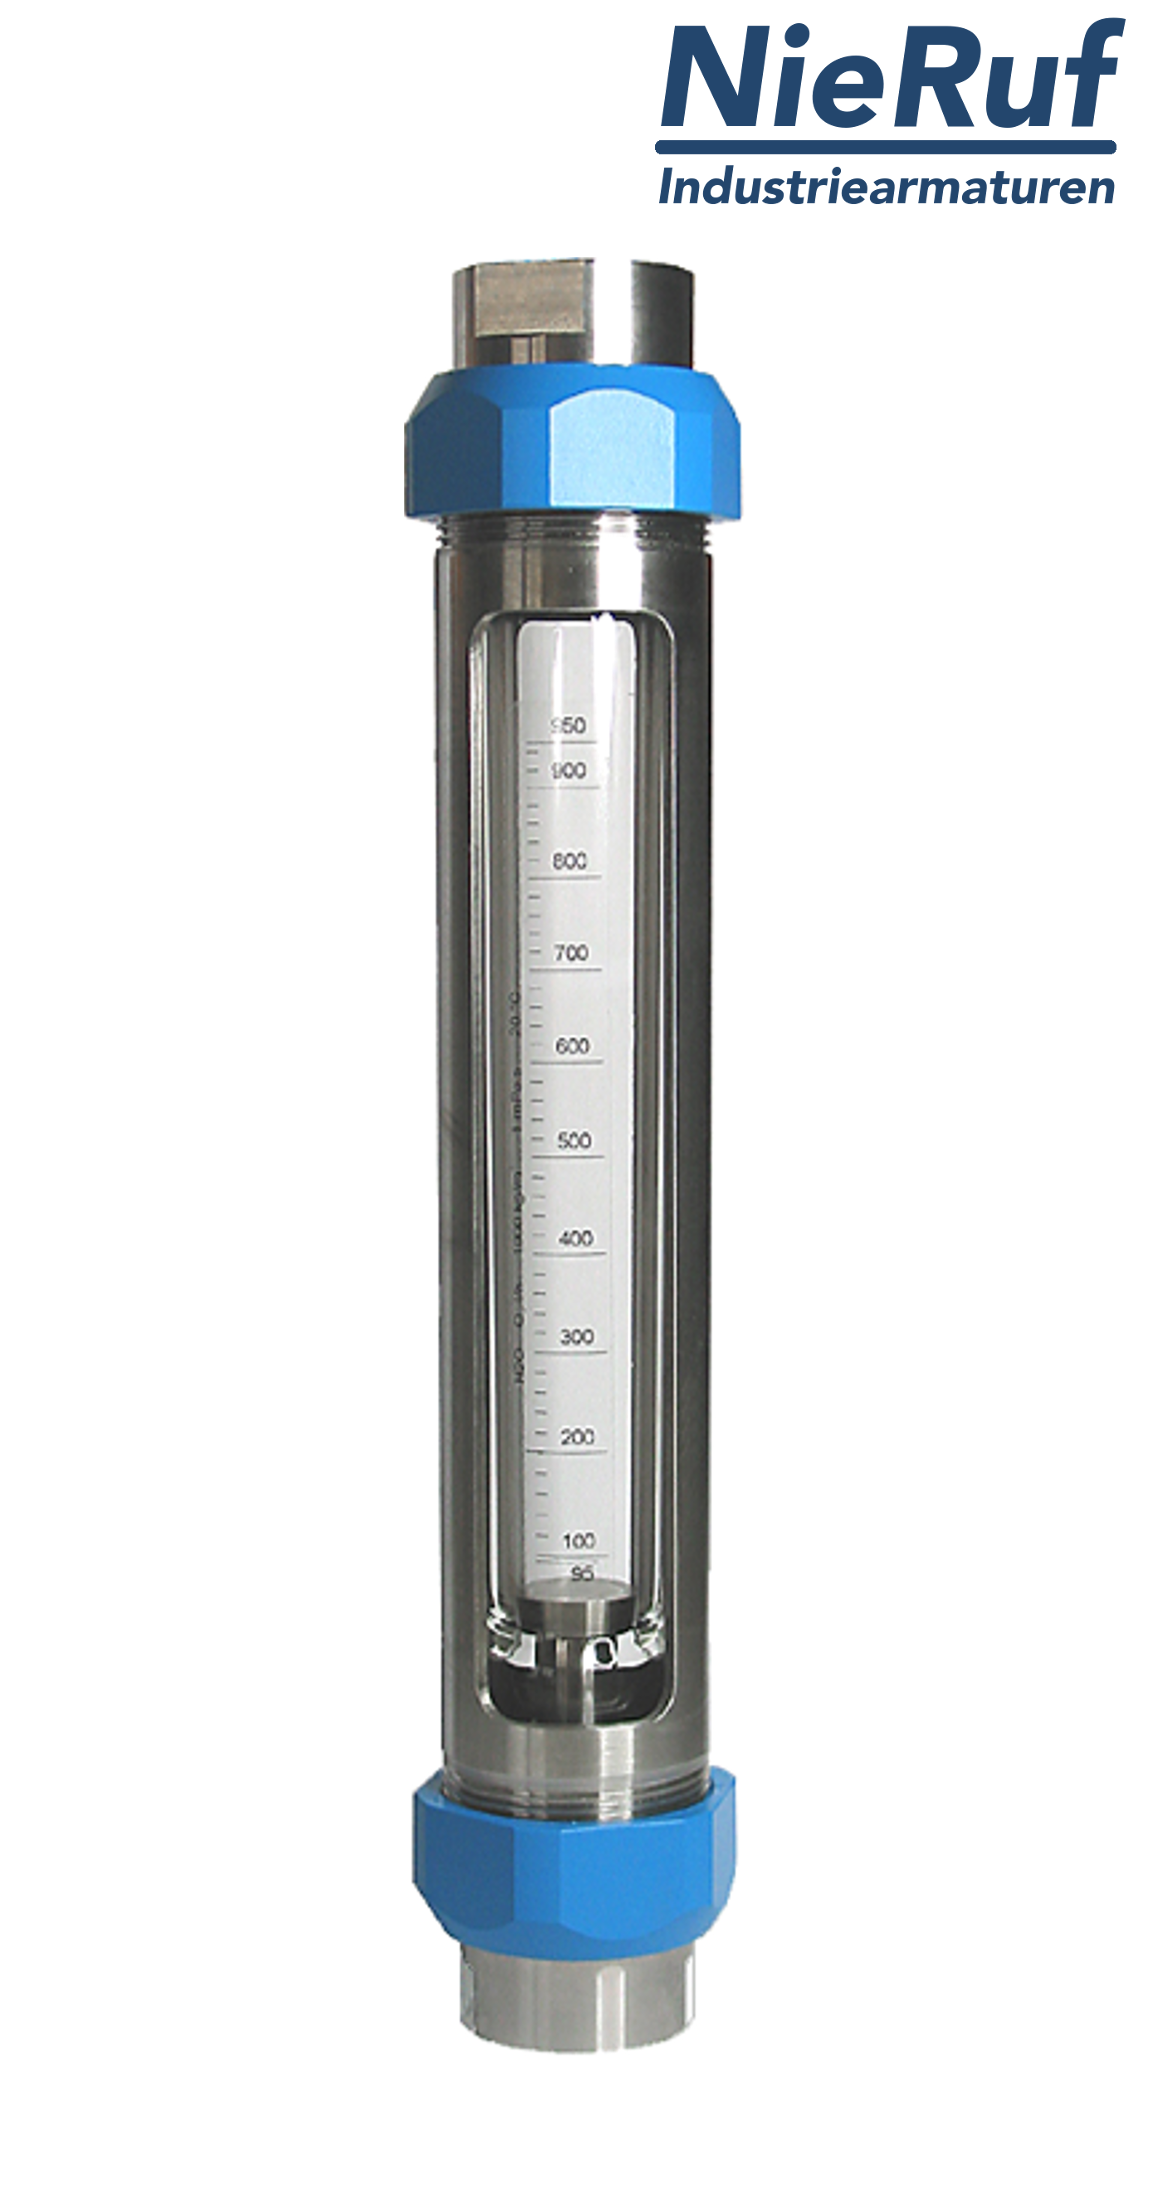 Variable area flowmeter stainless steel + borosilicate 1/4" inch 3.0 - 30.0 l/h water FKM